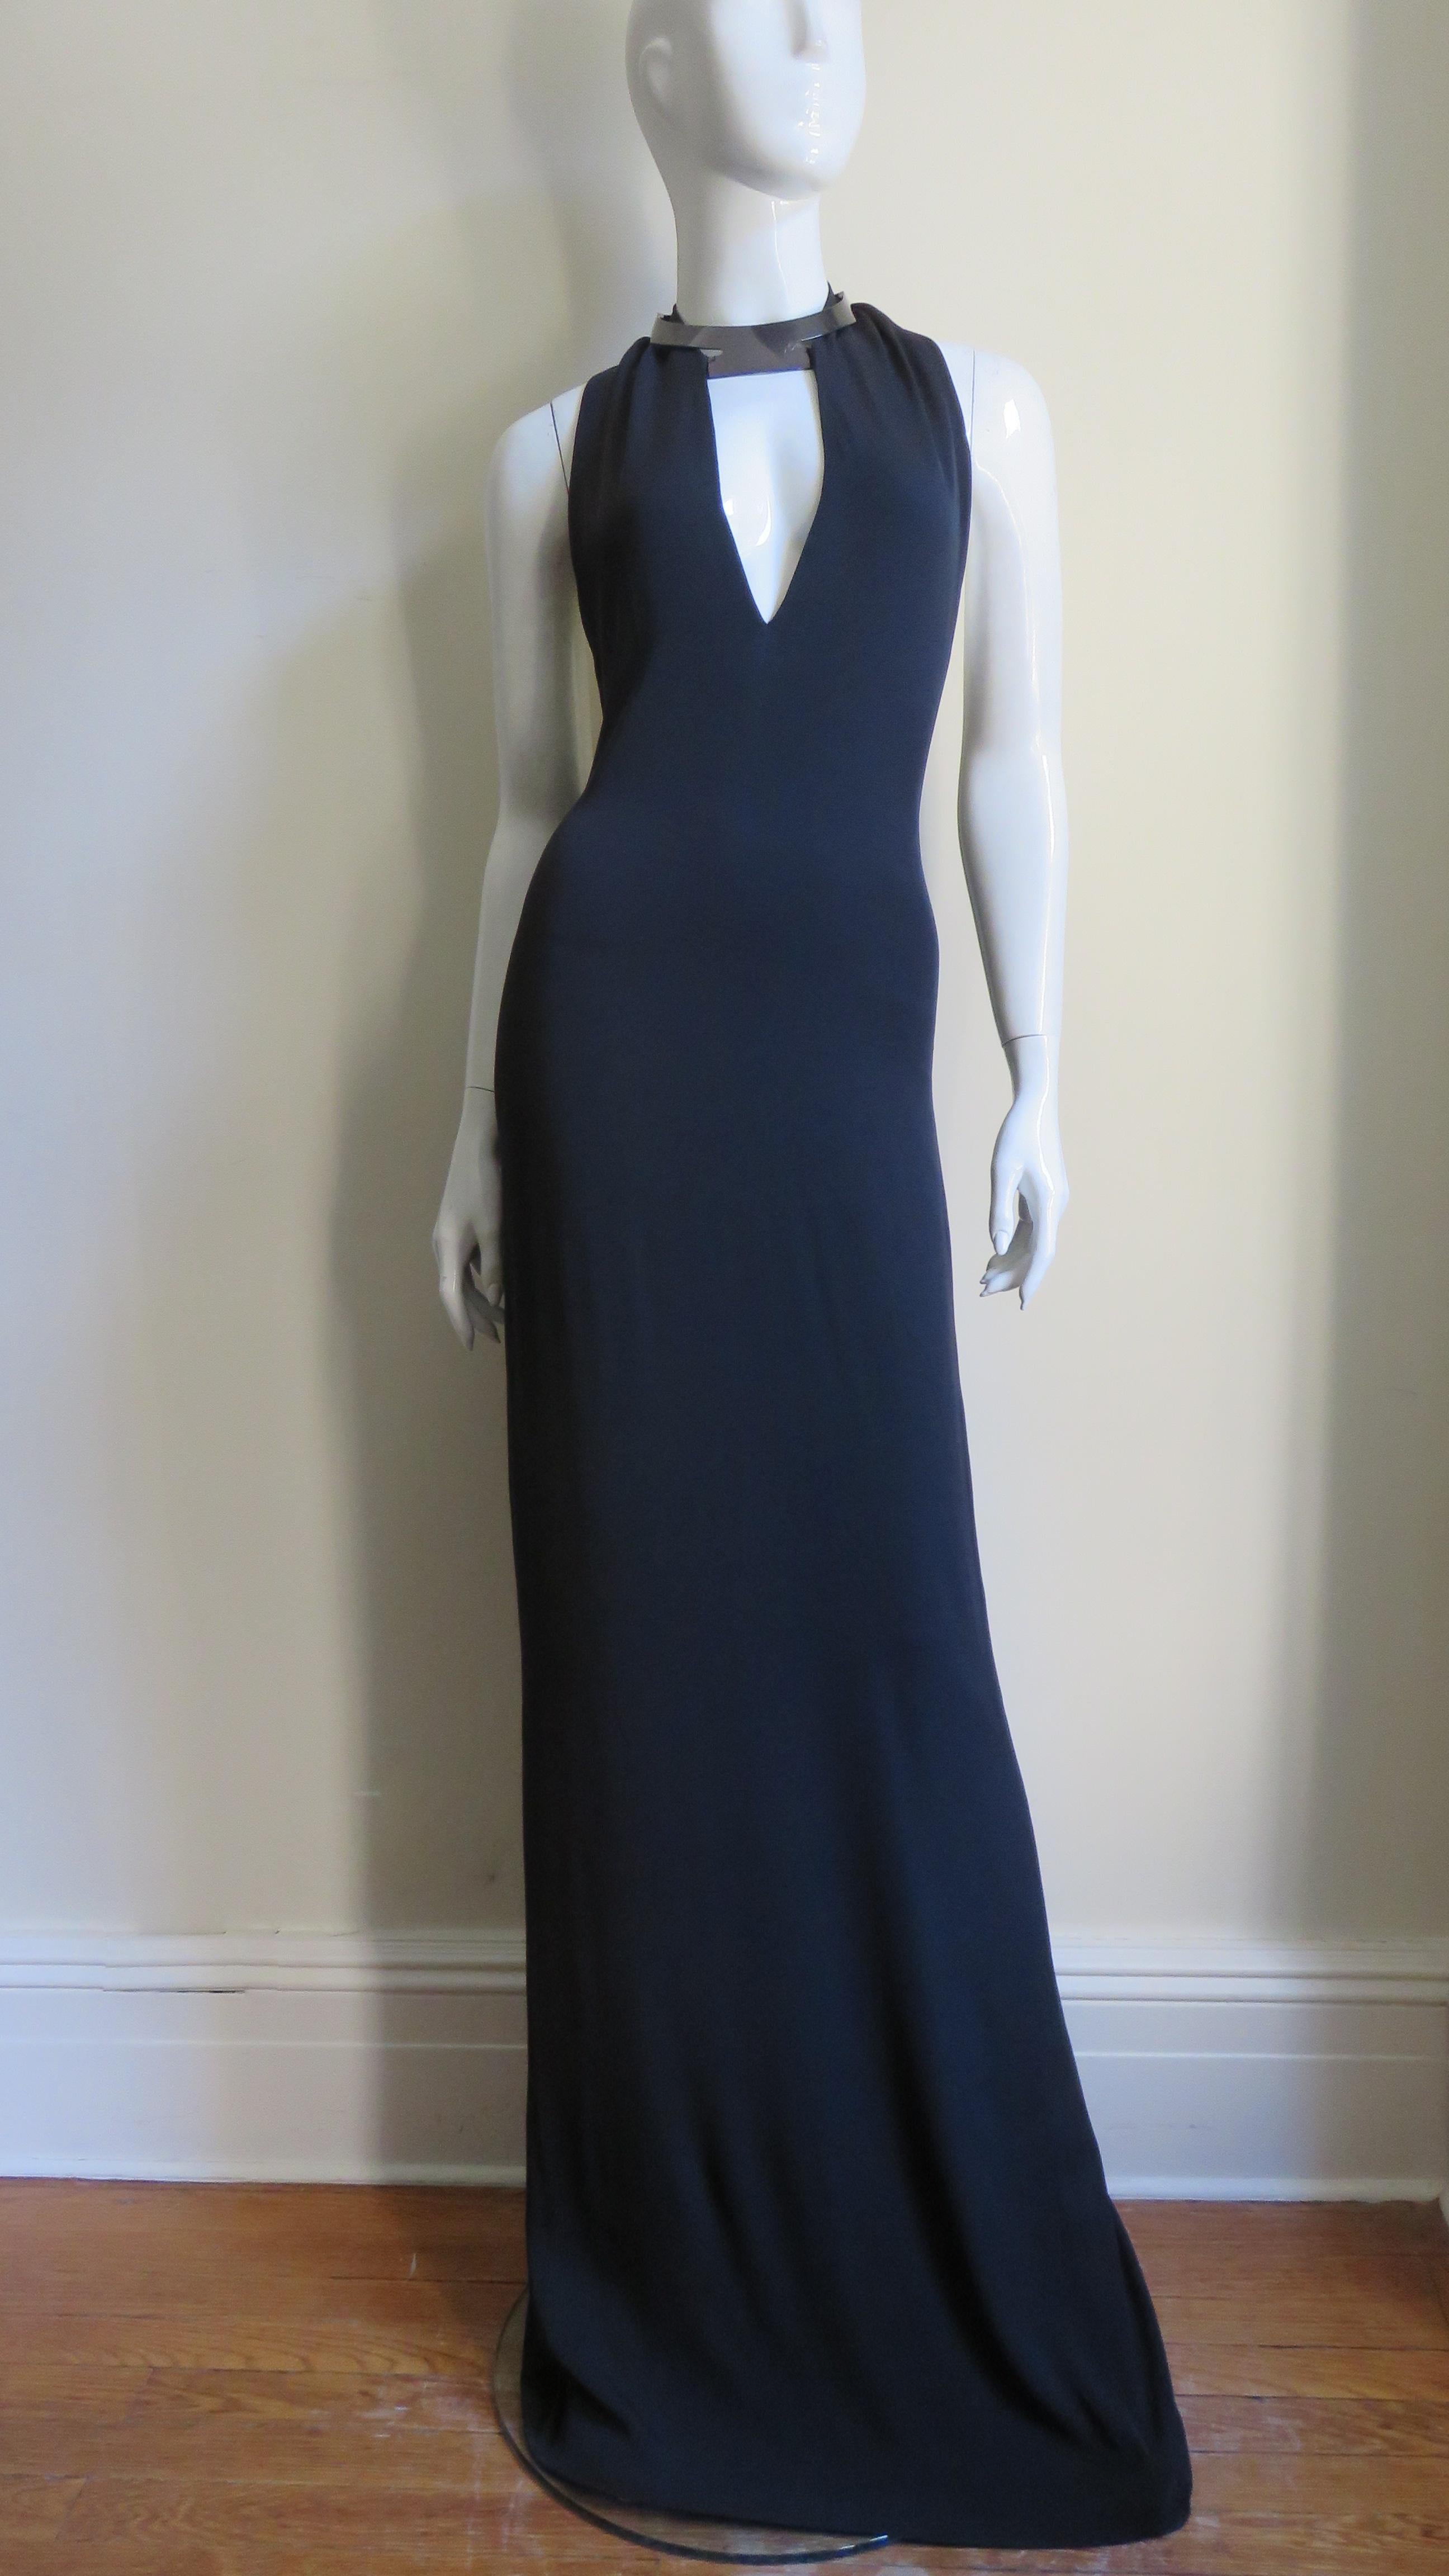 A gorgeous elegant black silk dress from Gucci S/S 2010 collection. The halter style dress has a front plunging cut out below a fabulous silver grey choker style collar with adjustable leather straps closing at the back of the neck. The dress skims